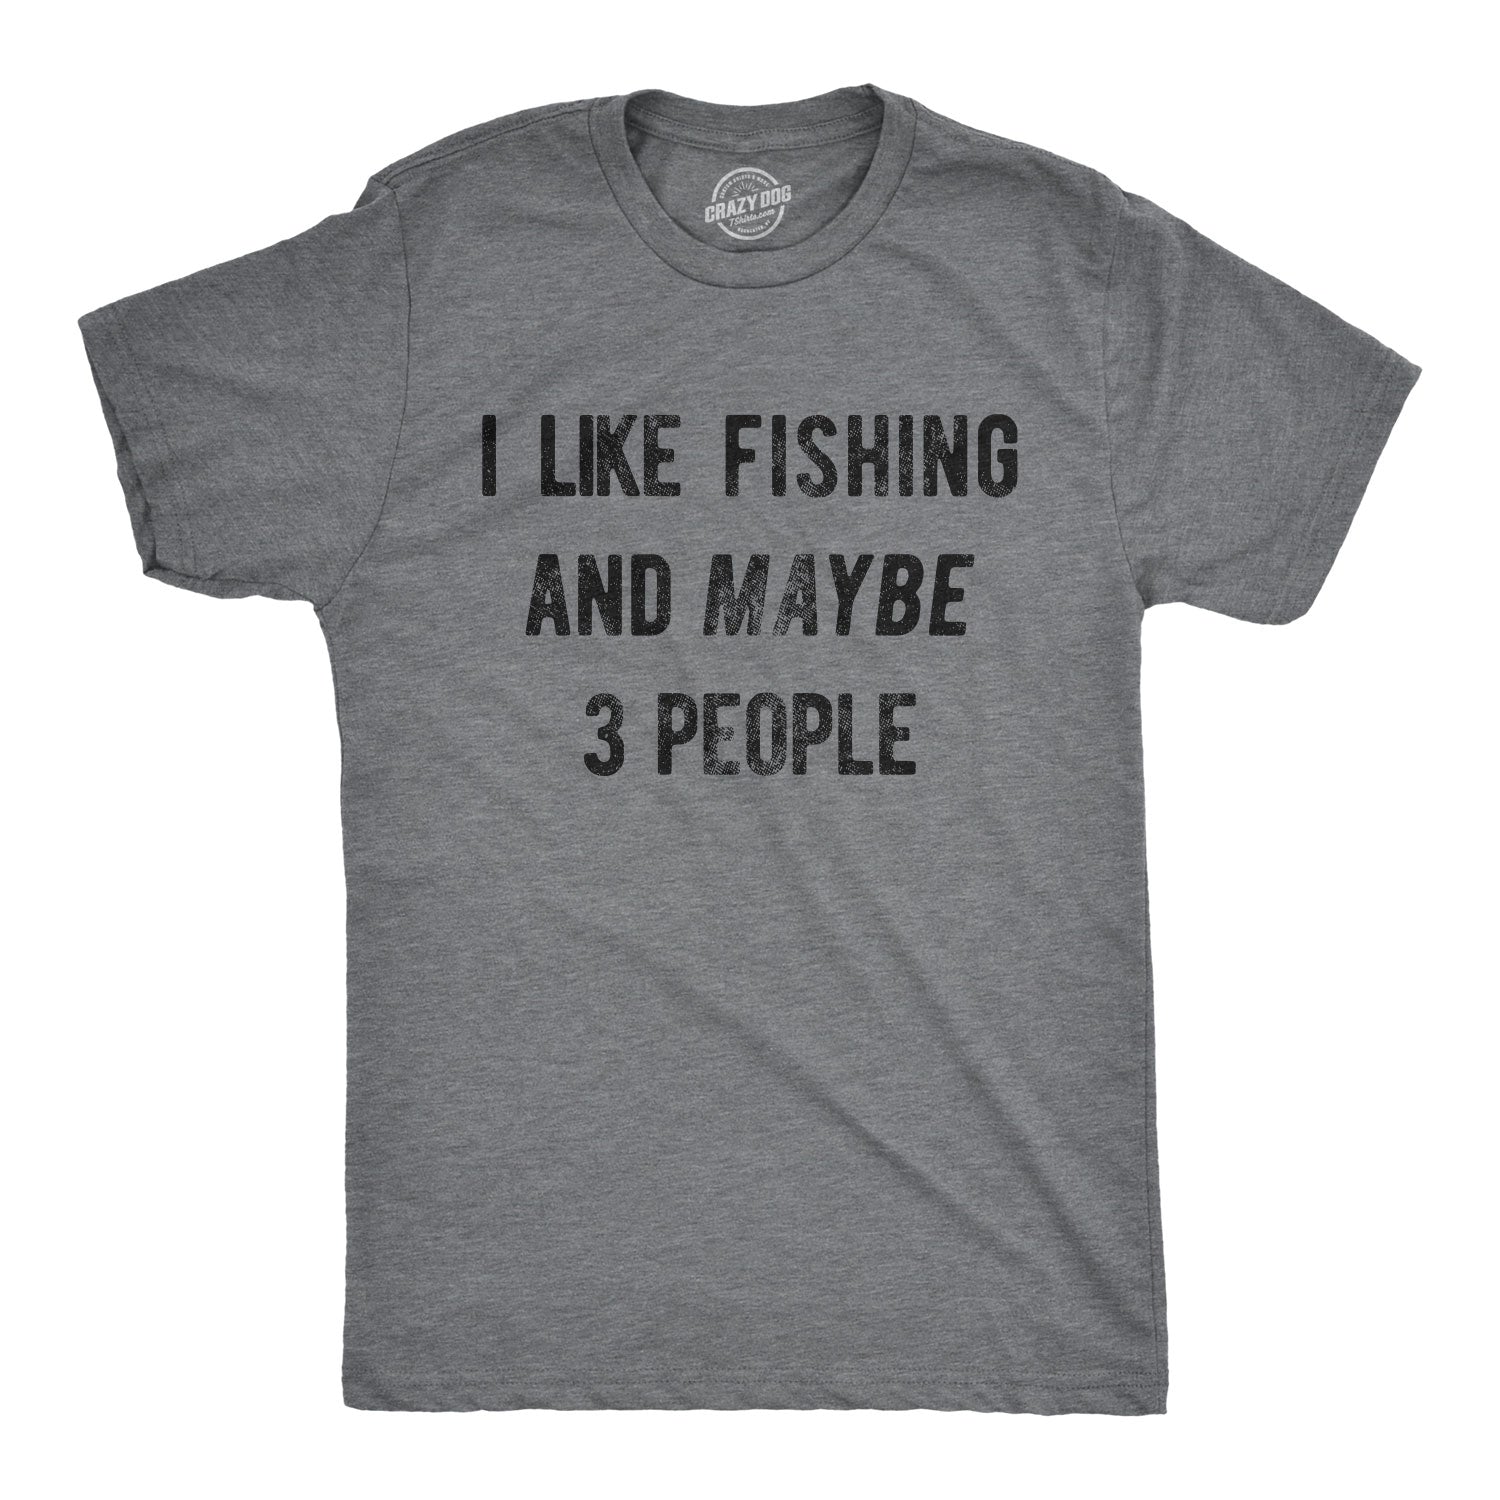 Wife Won't Follow Me There Fishing Shirt Funny Fishing Shirt Men's T-shirt  Fishing Tee Shirt Fishing Tees Six Colors 